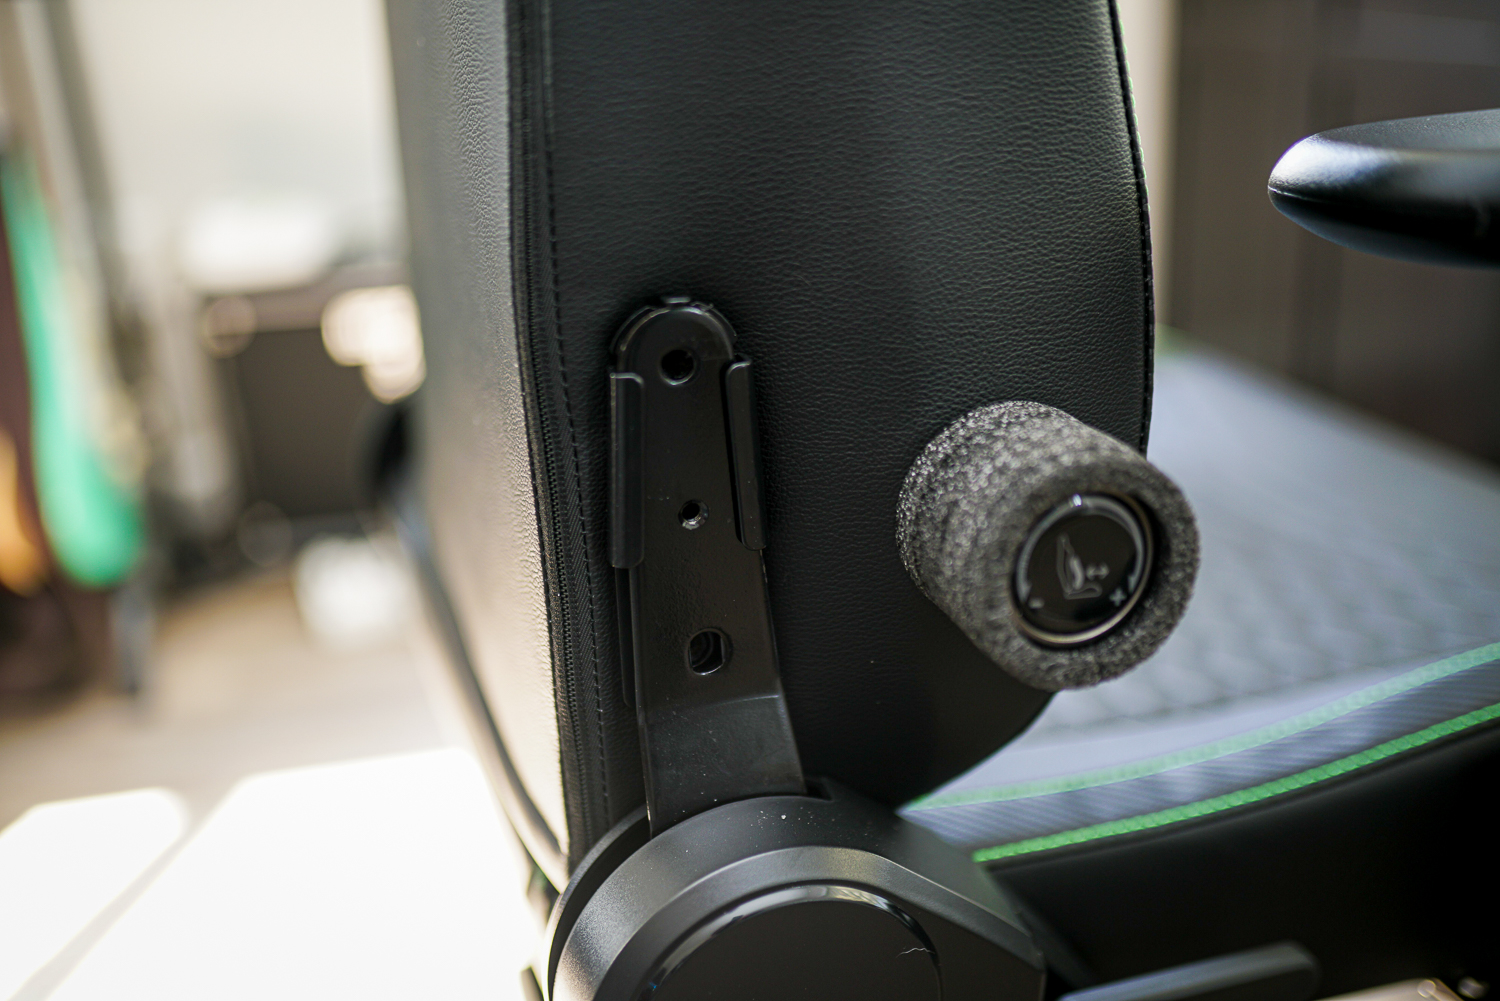 A bracket holding up the back of the Razer Iskur V2 chair.